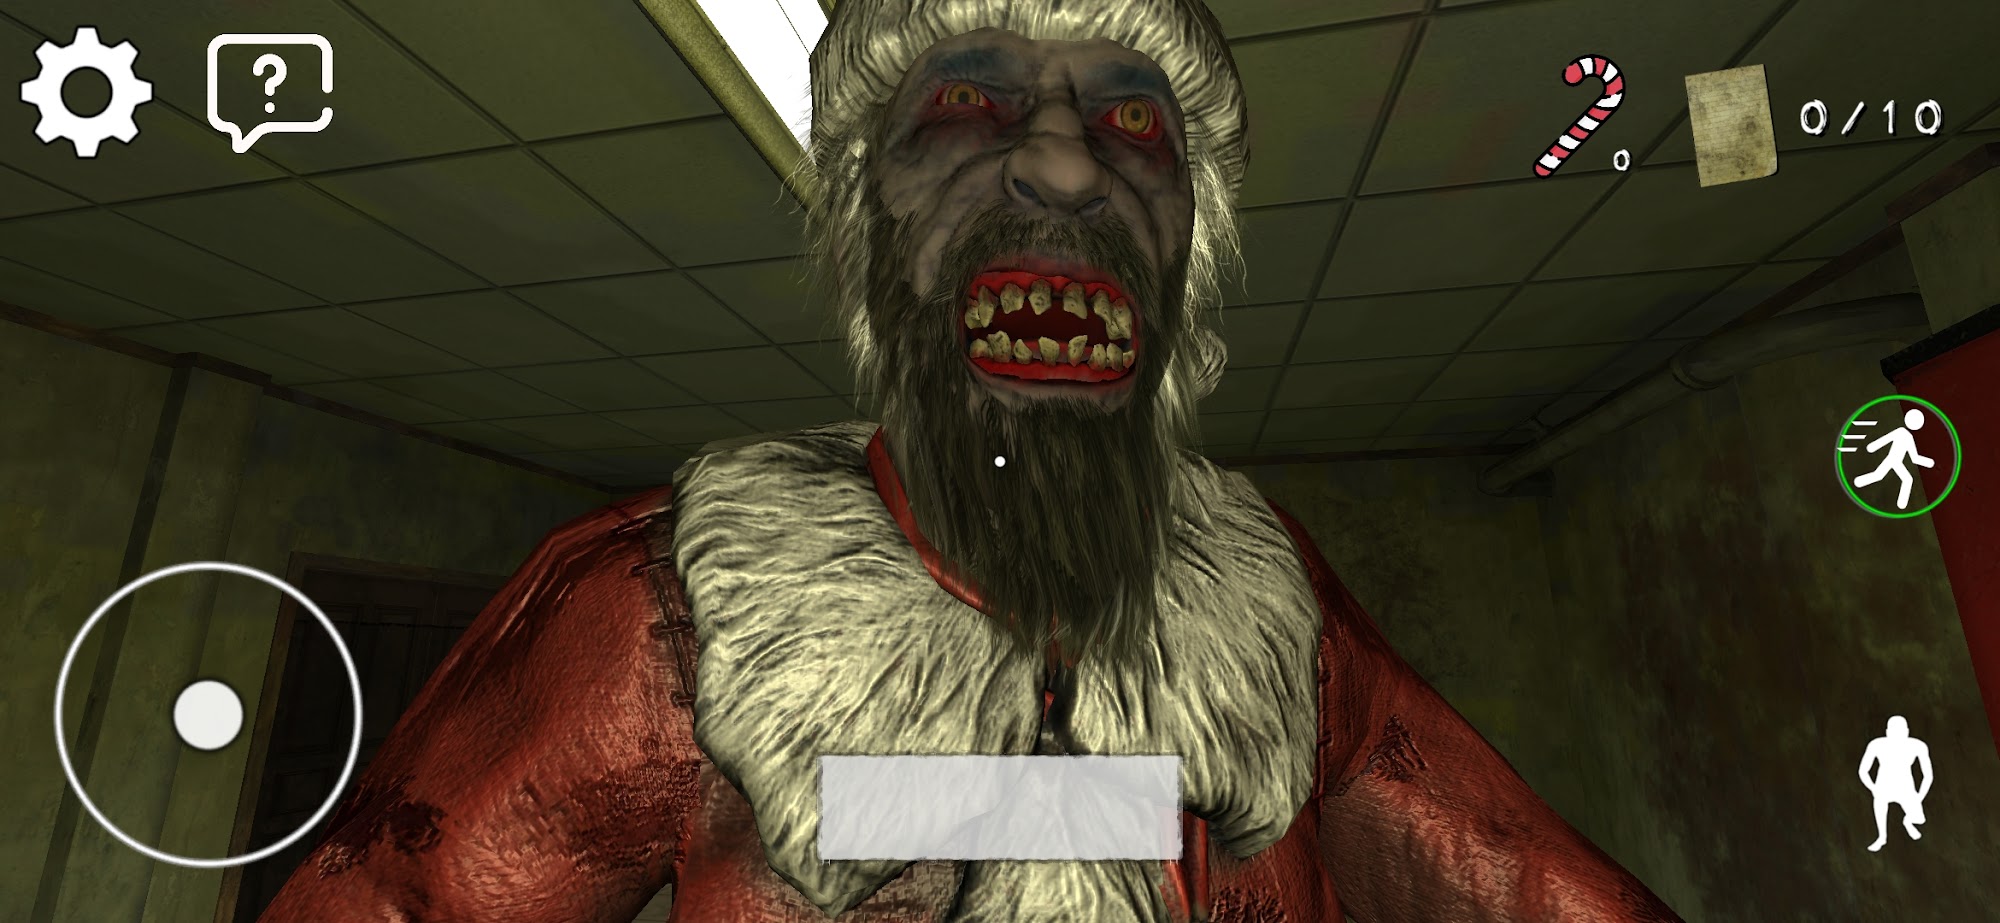 Download Scary Santa Claus Horror Game Android free game.